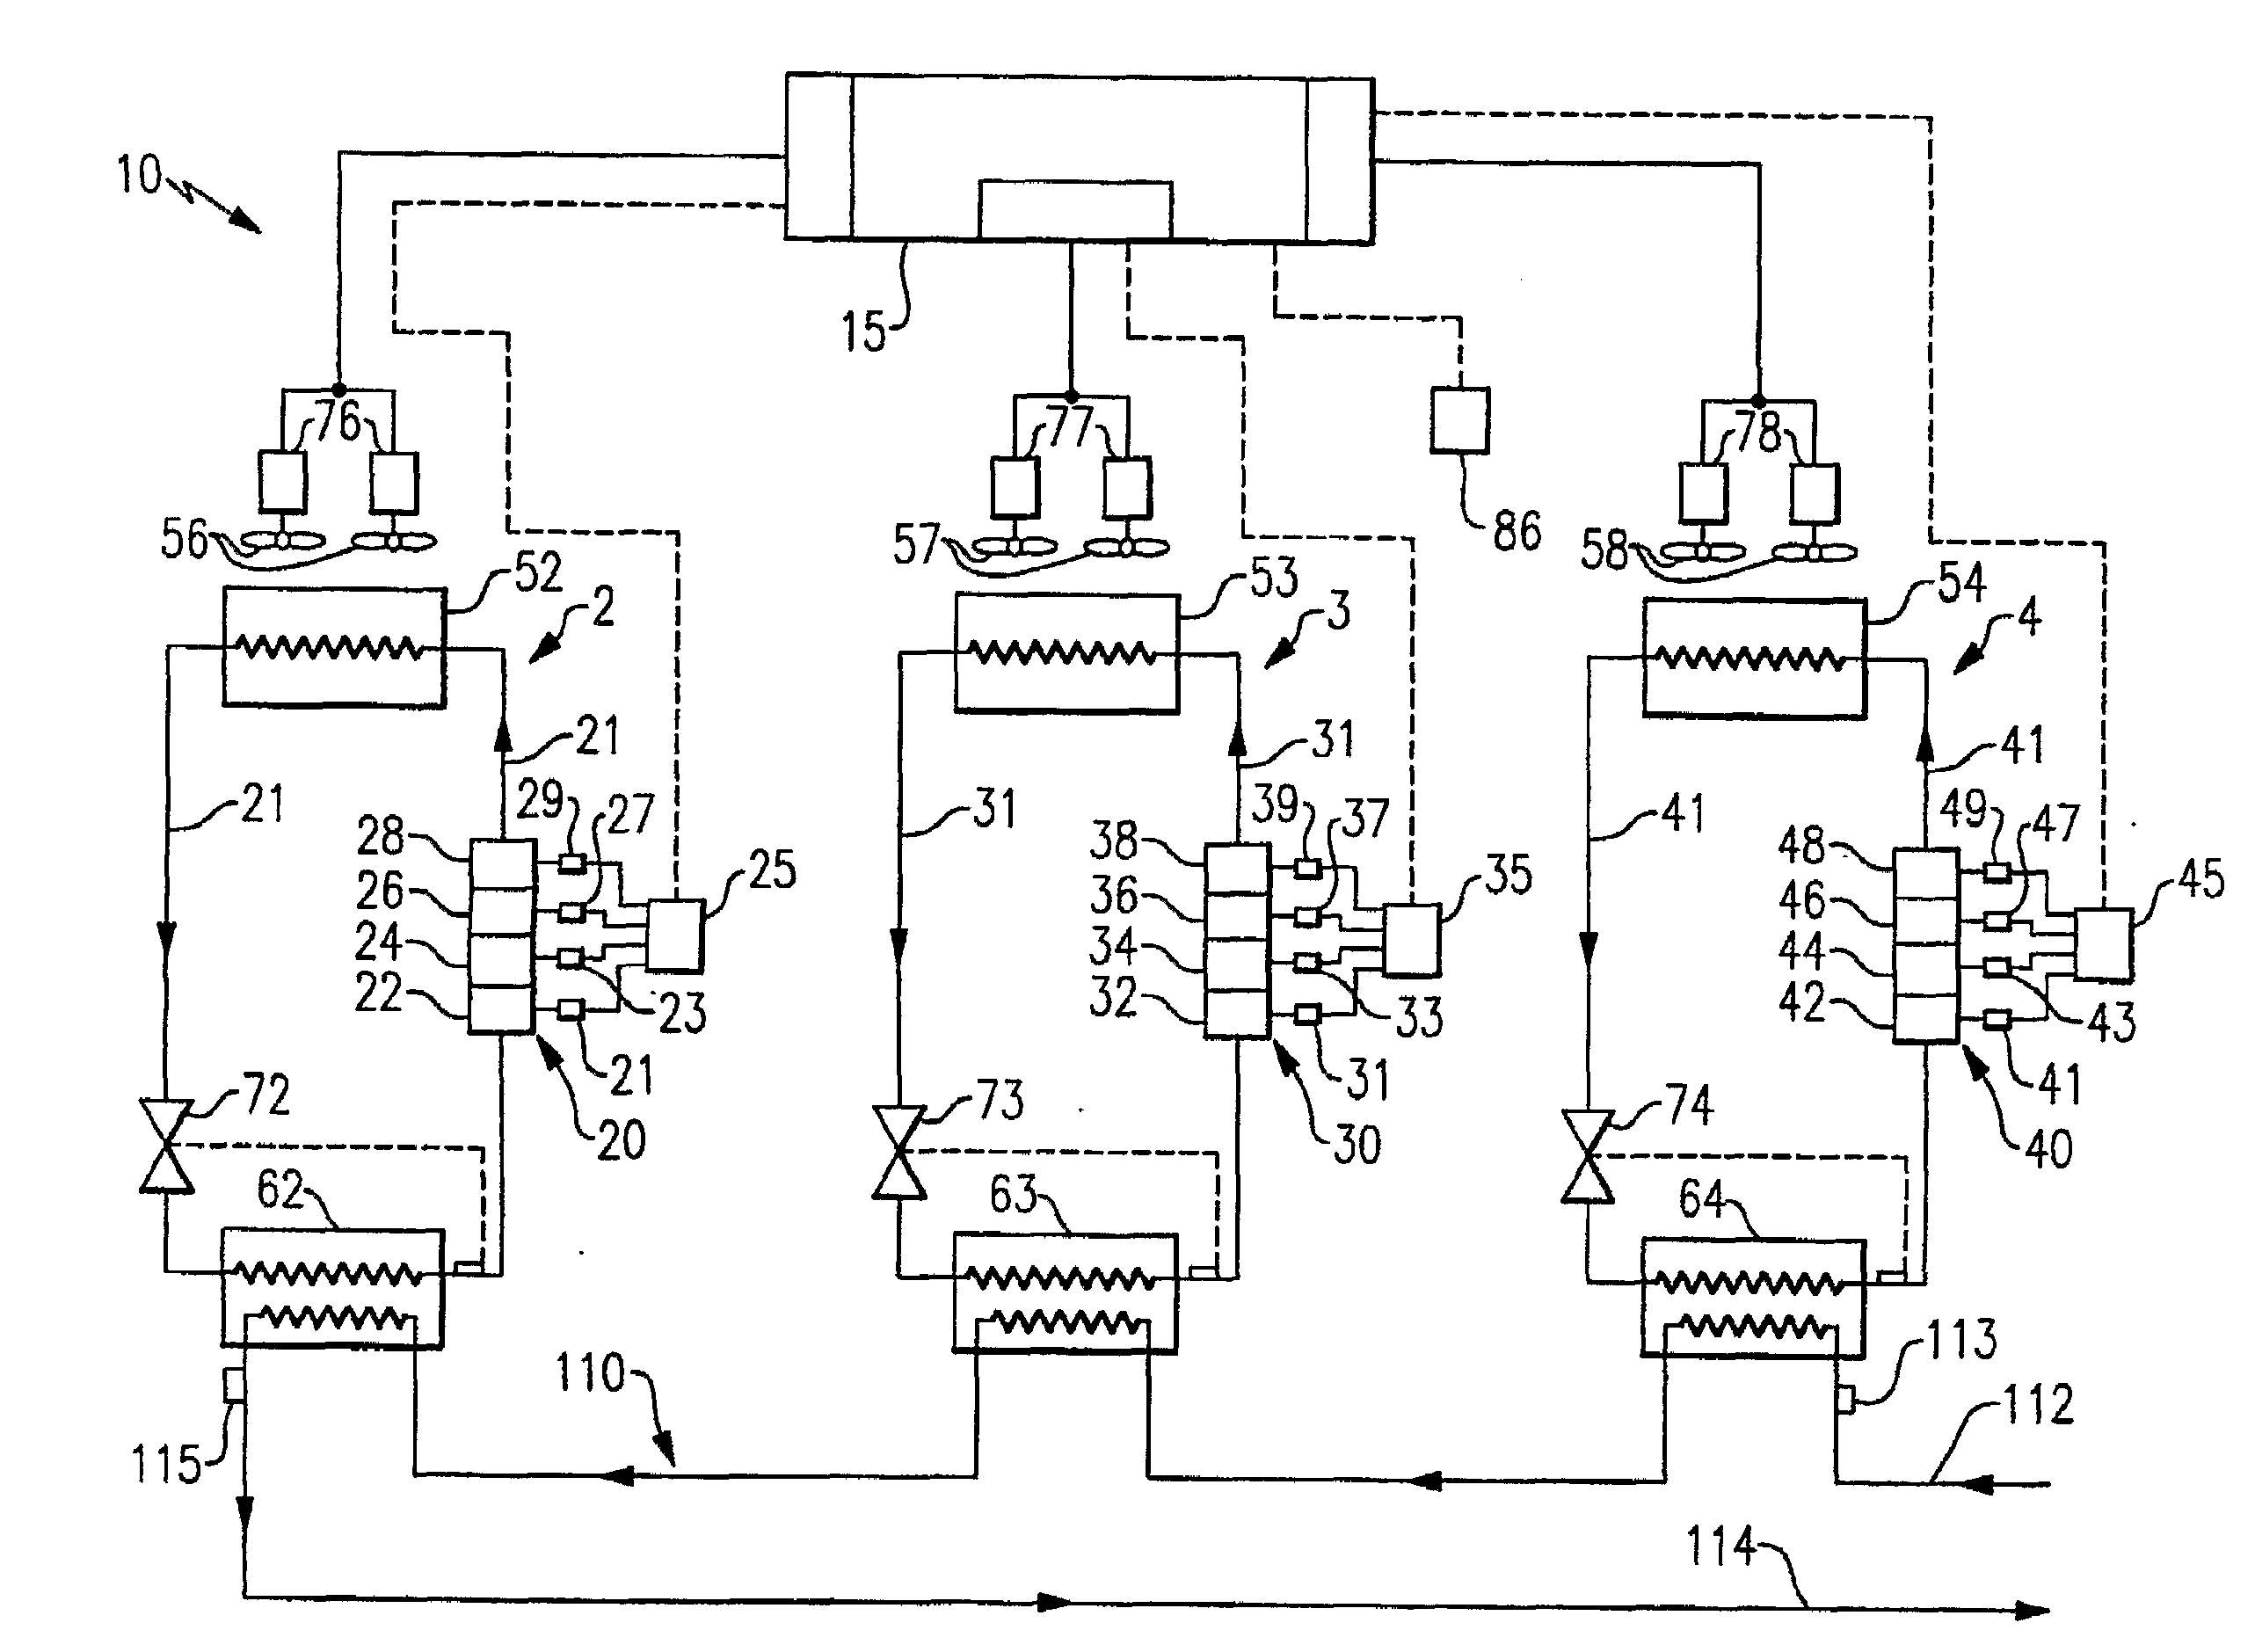 Optimization of air cooled chiller system operation